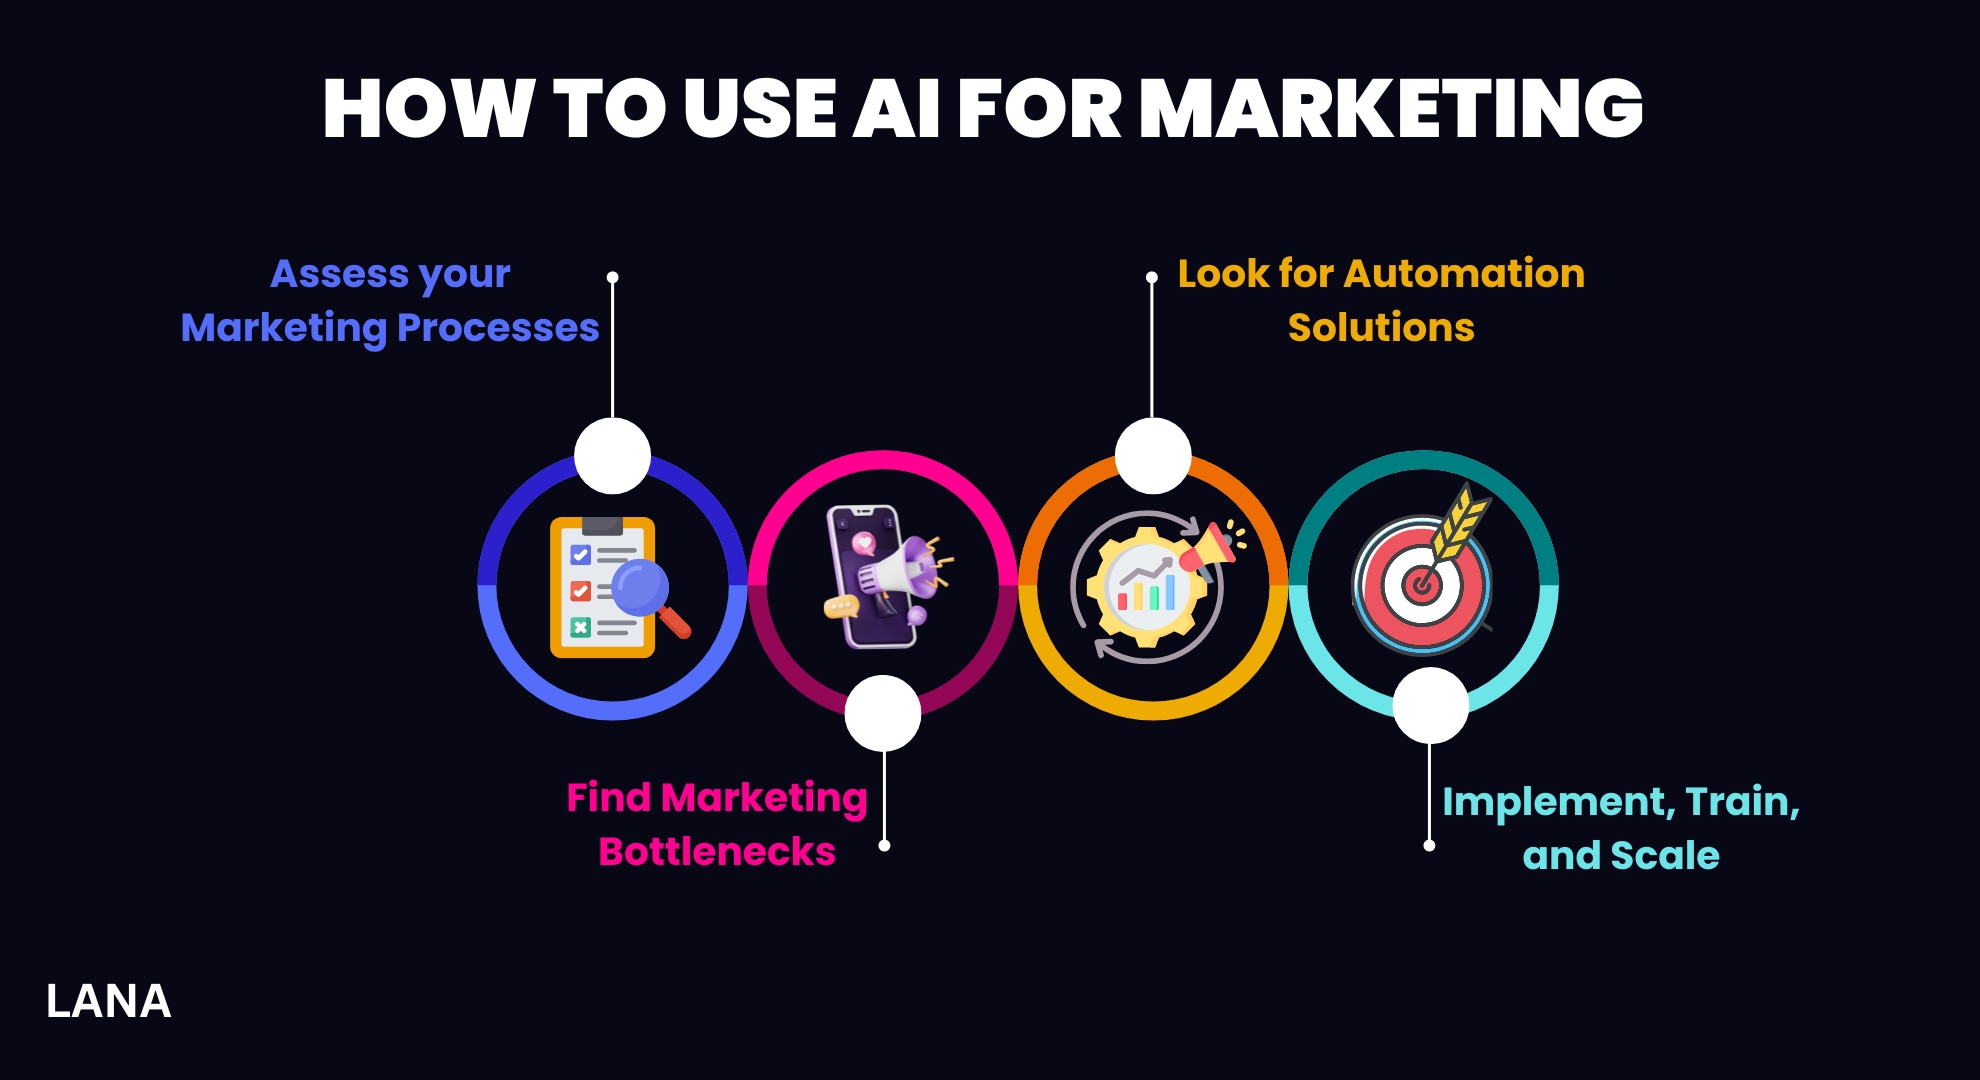 How to Use AI for Marketing